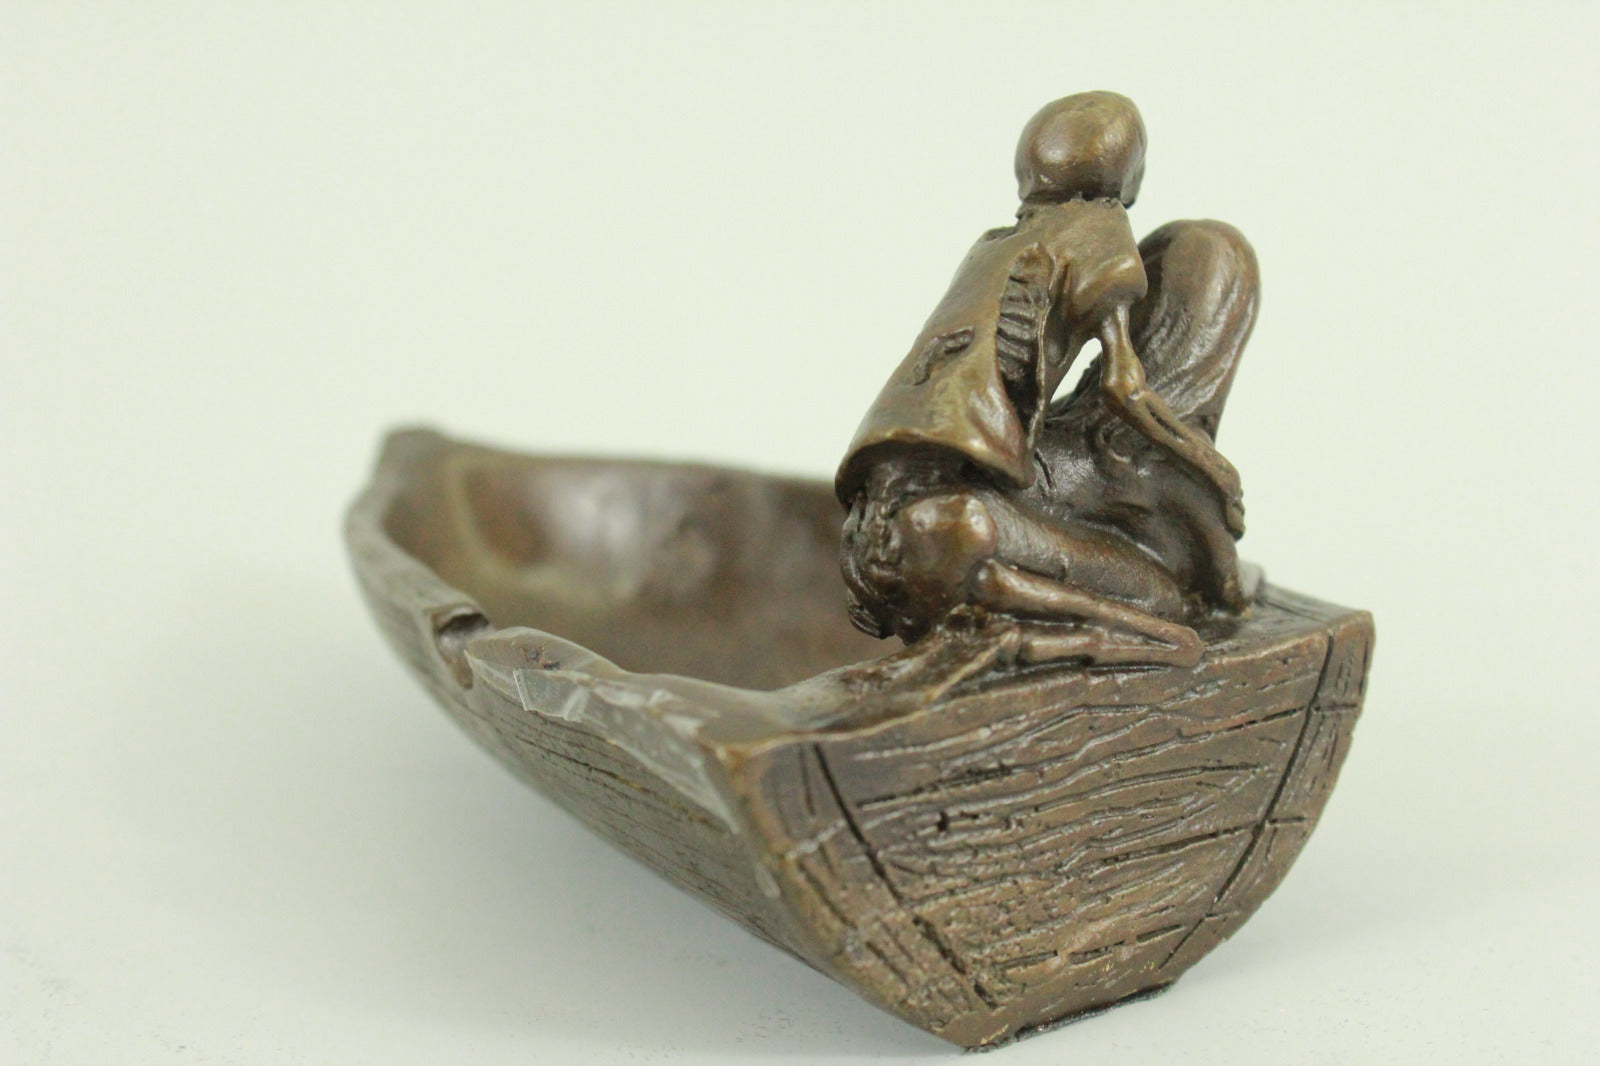 Nude Nymph Jewelry Tray Coin Key Holder Bronze Sculpture Handcrafted Figure Art